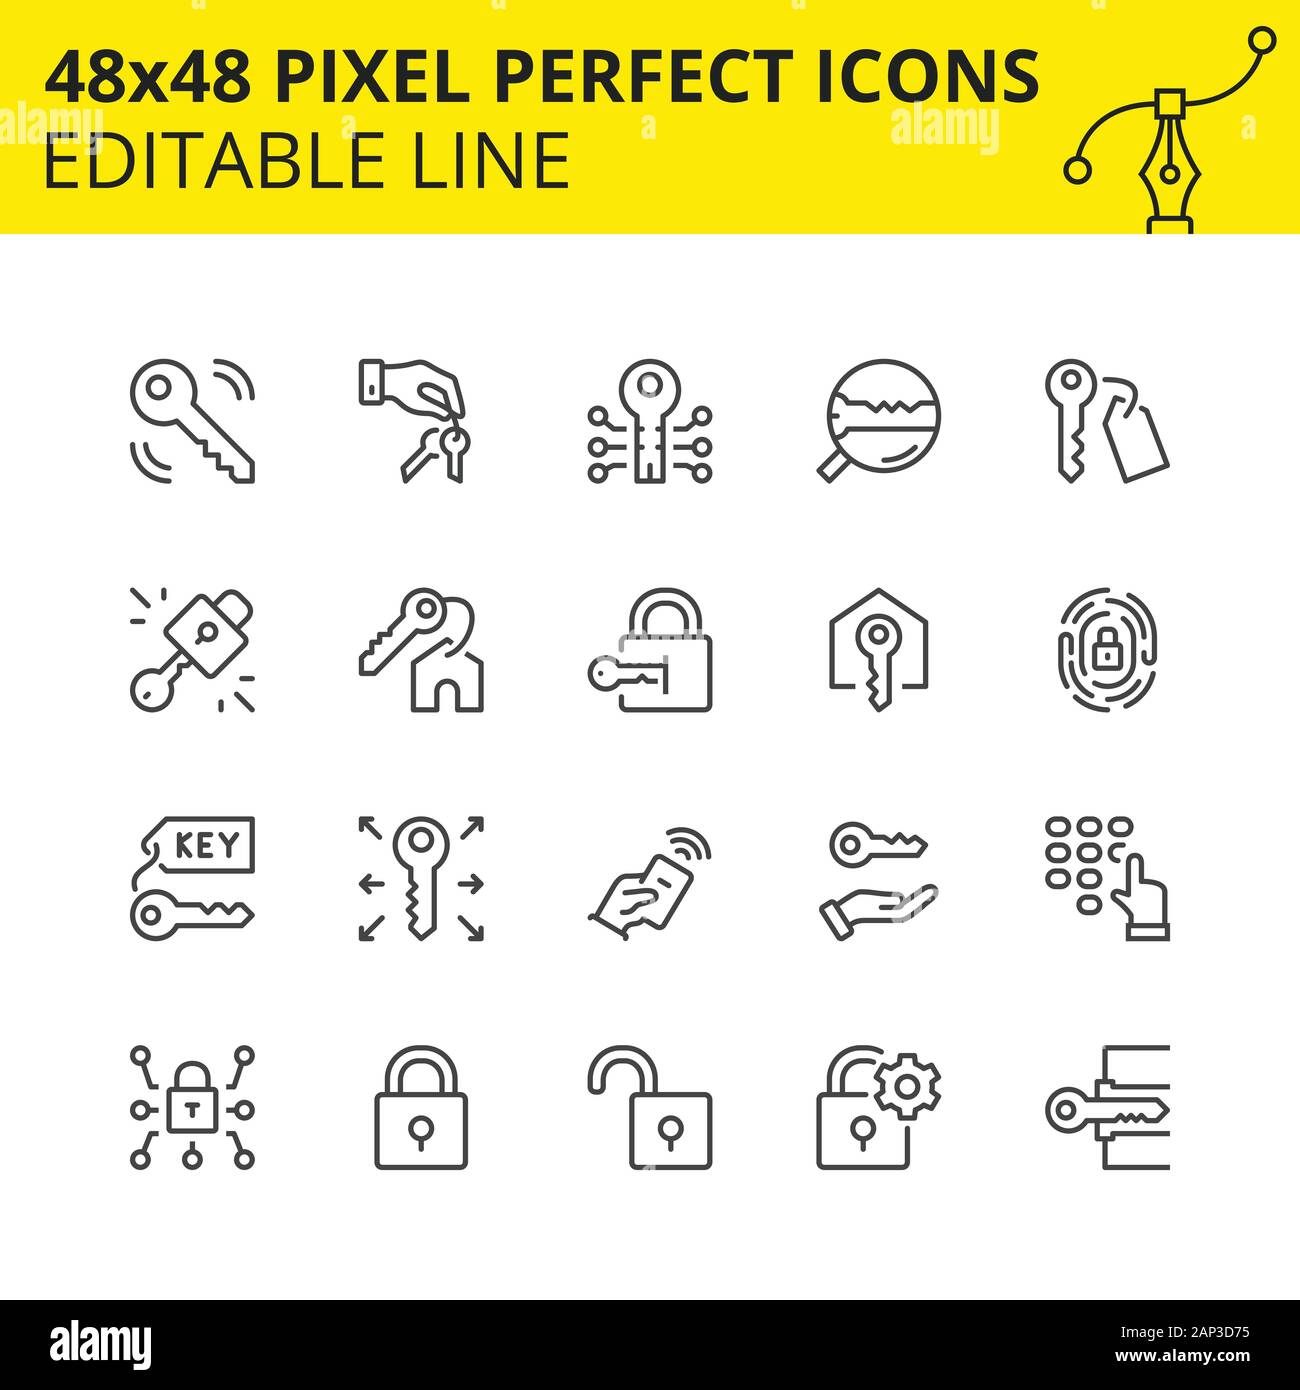 Icons of Keys, Locks and Safety. Includes Fingerprint, Remote Controller, Keypad. Pixel Perfect Scaled Set 48x48. Vector. Stock Vector